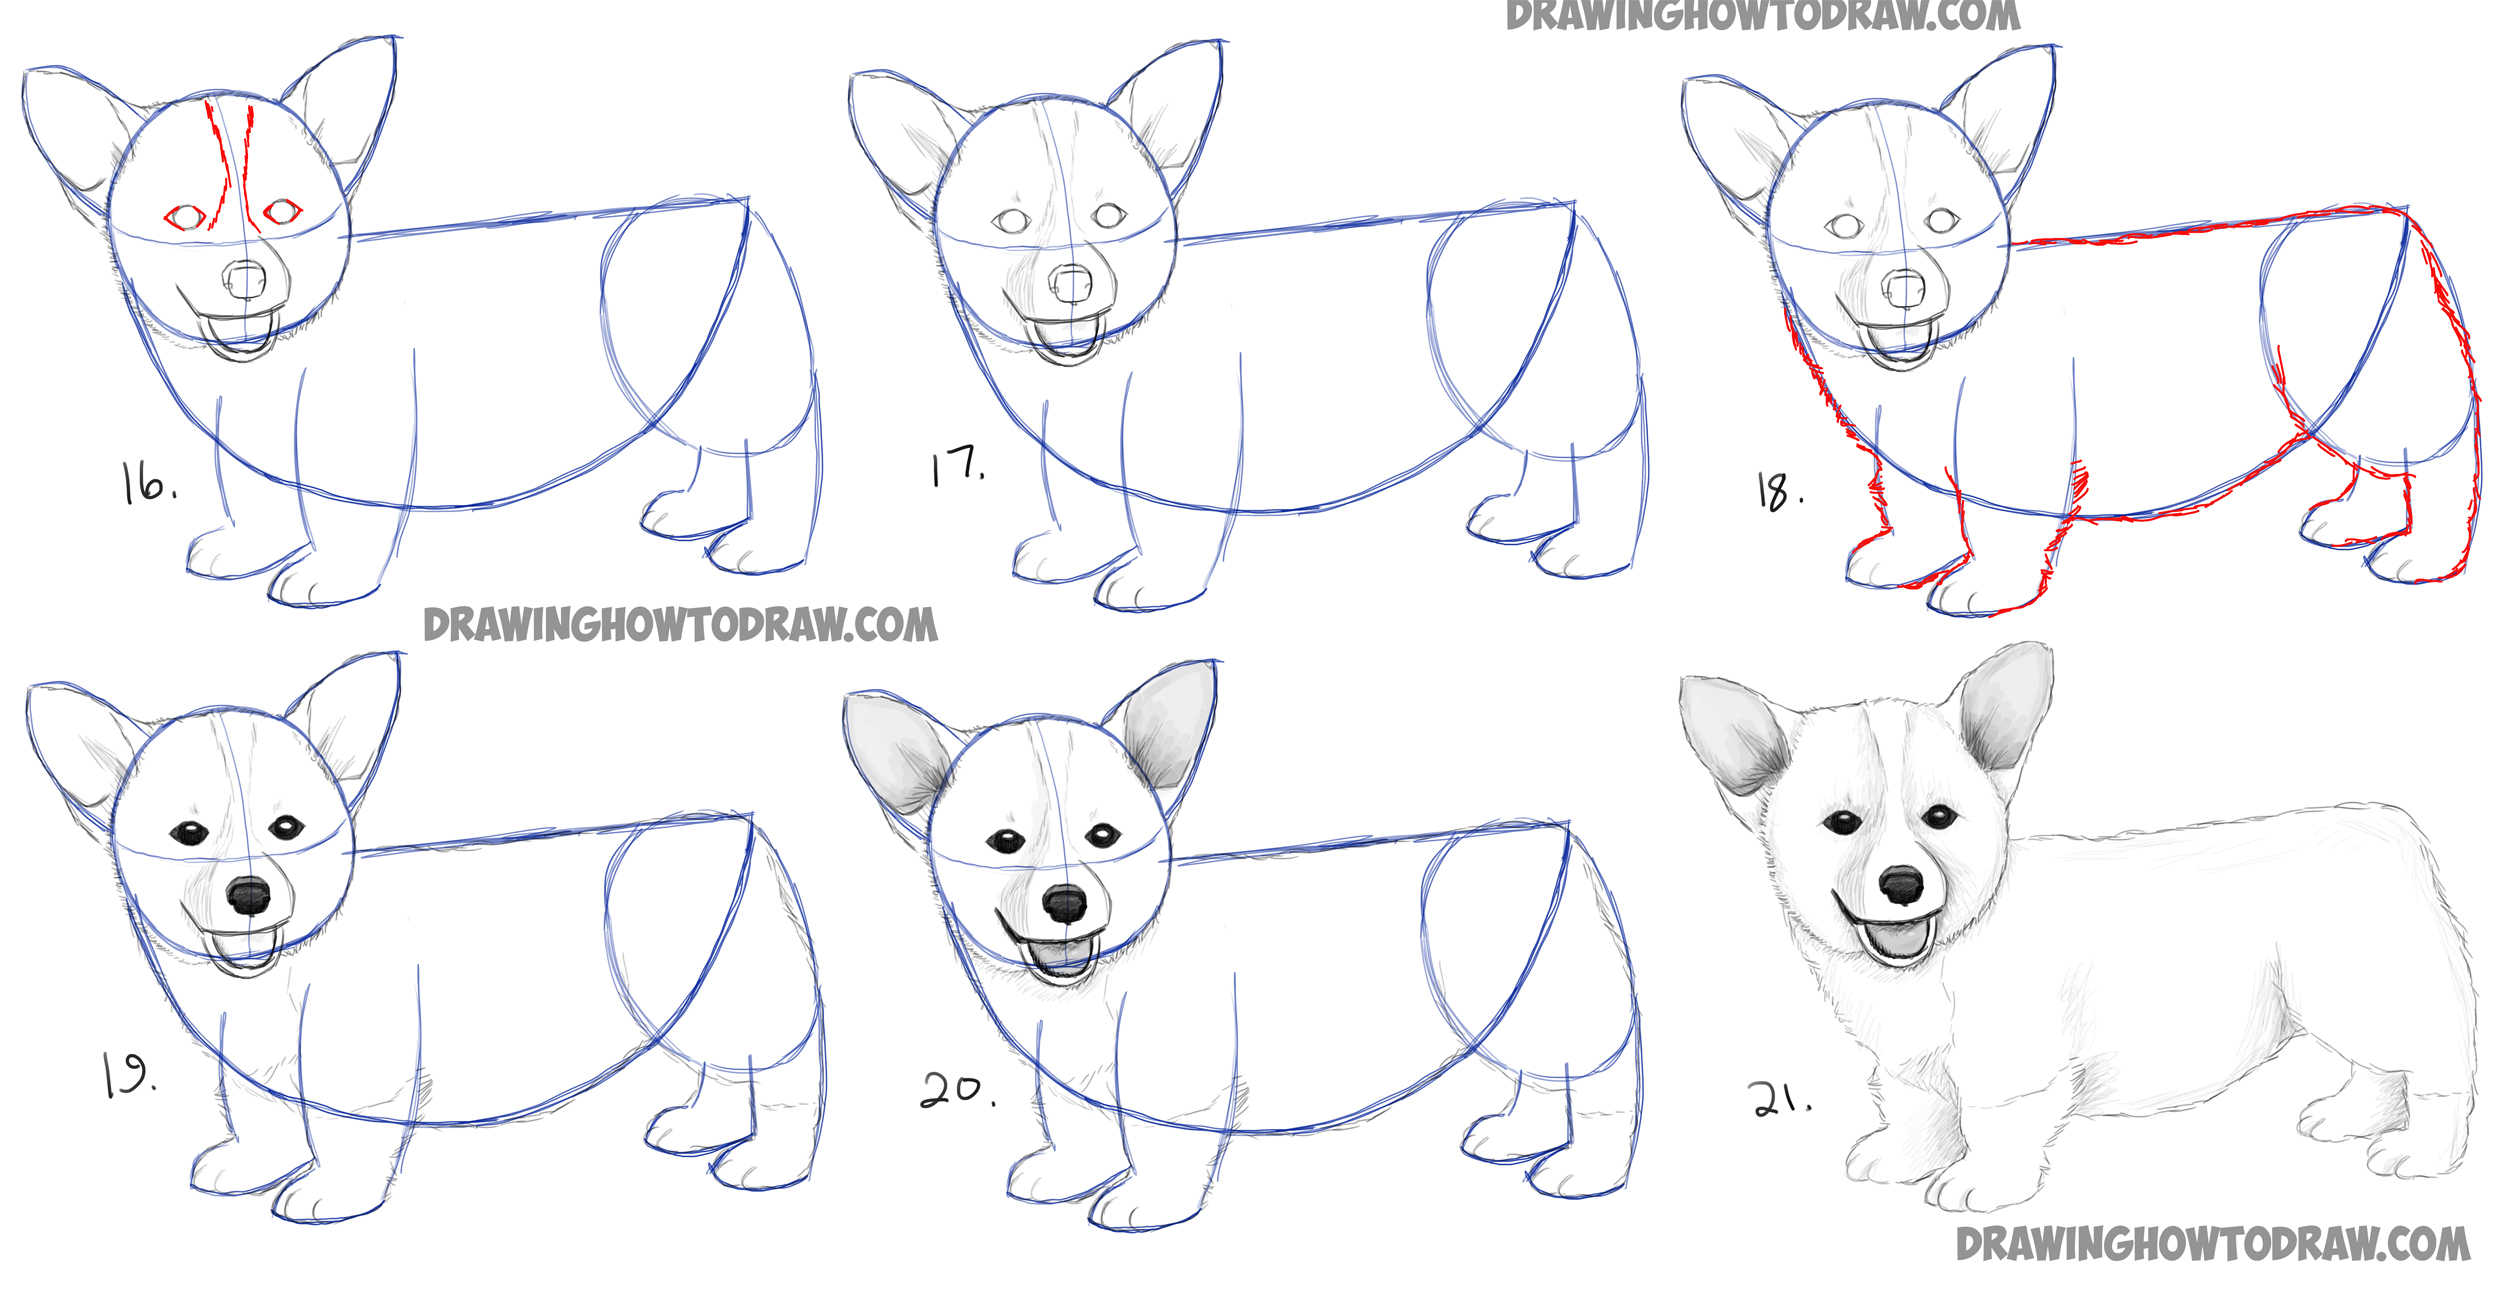 How To Draw A Realistic Dog Tutorial For Beginners | All in one Photos